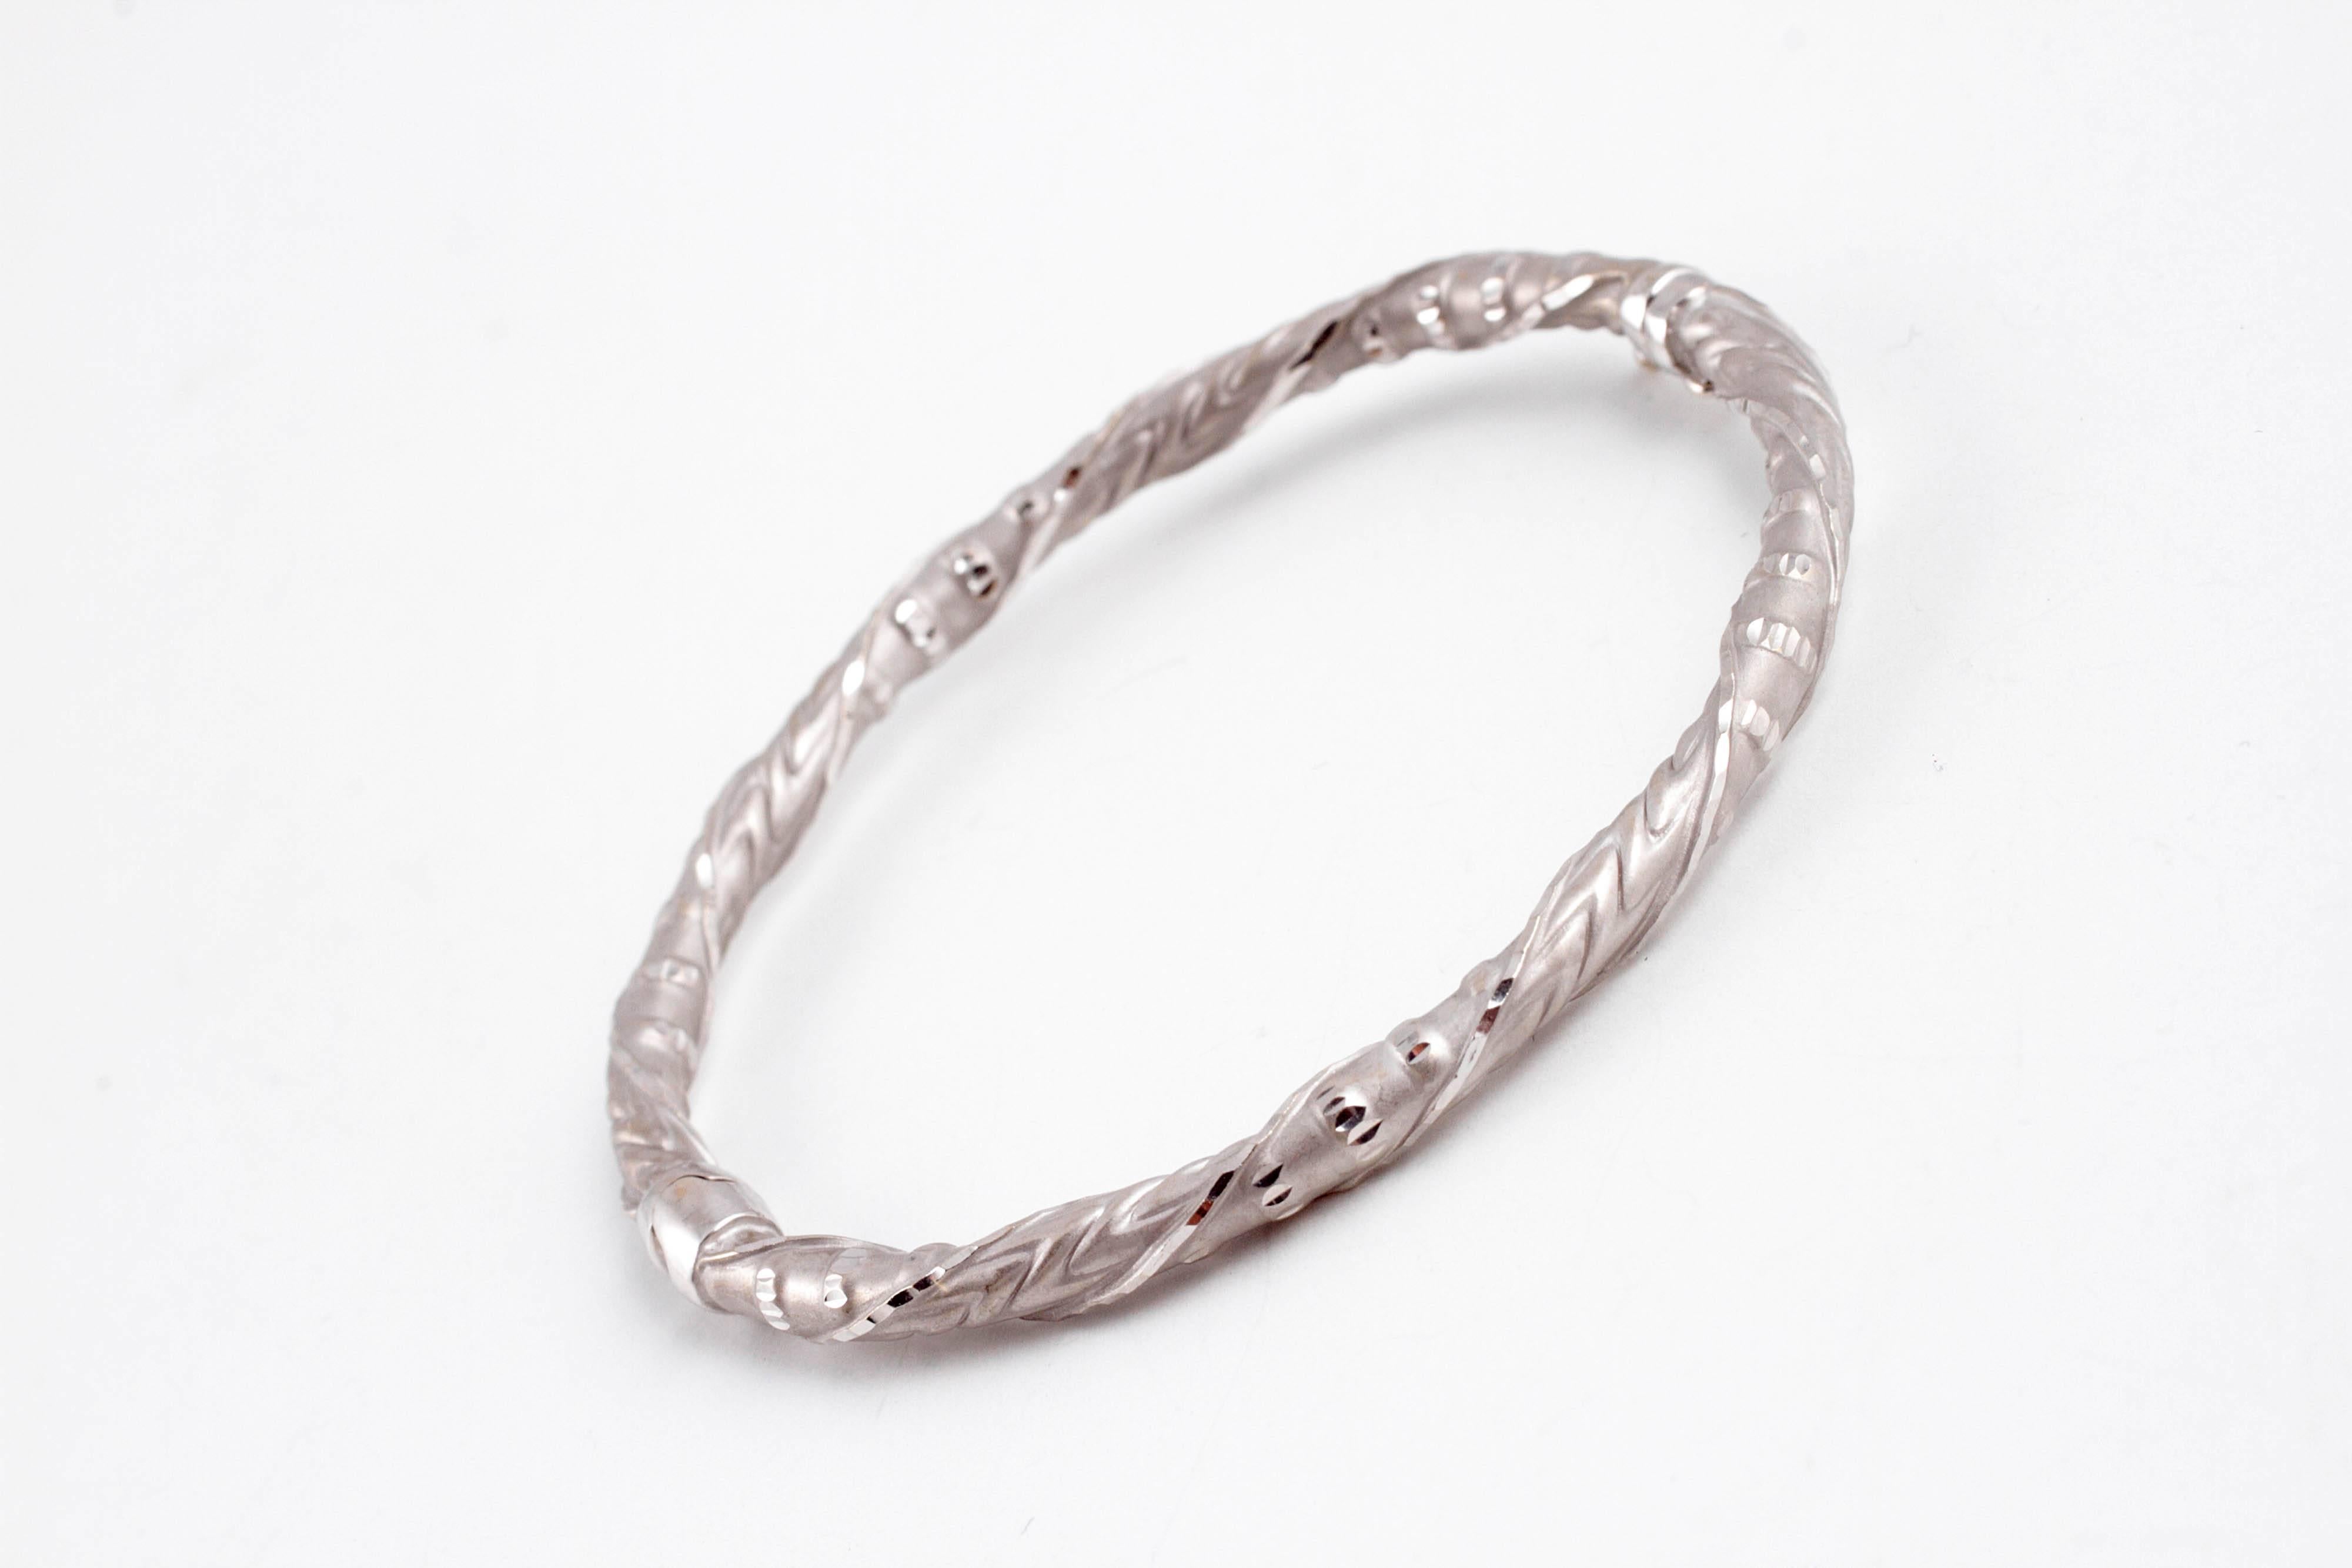 Highly-polished and matte finished, etched bangle, secured with a safety catch. Layer it or wear it alone!